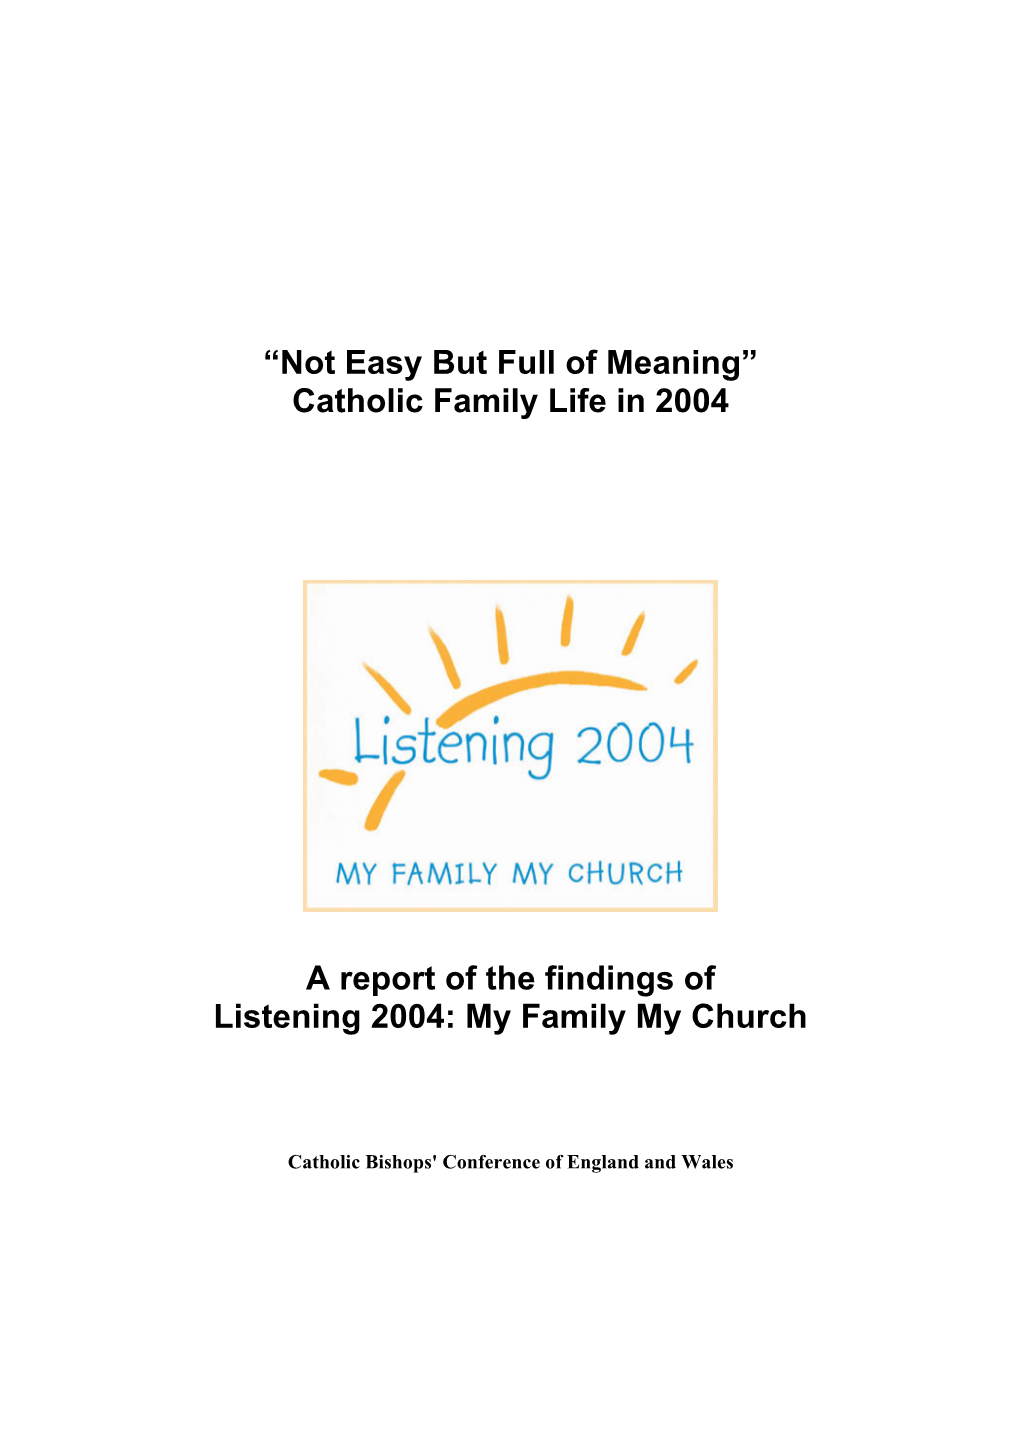 Not Easy but Full of Meaning” Catholic Family Life in 2004